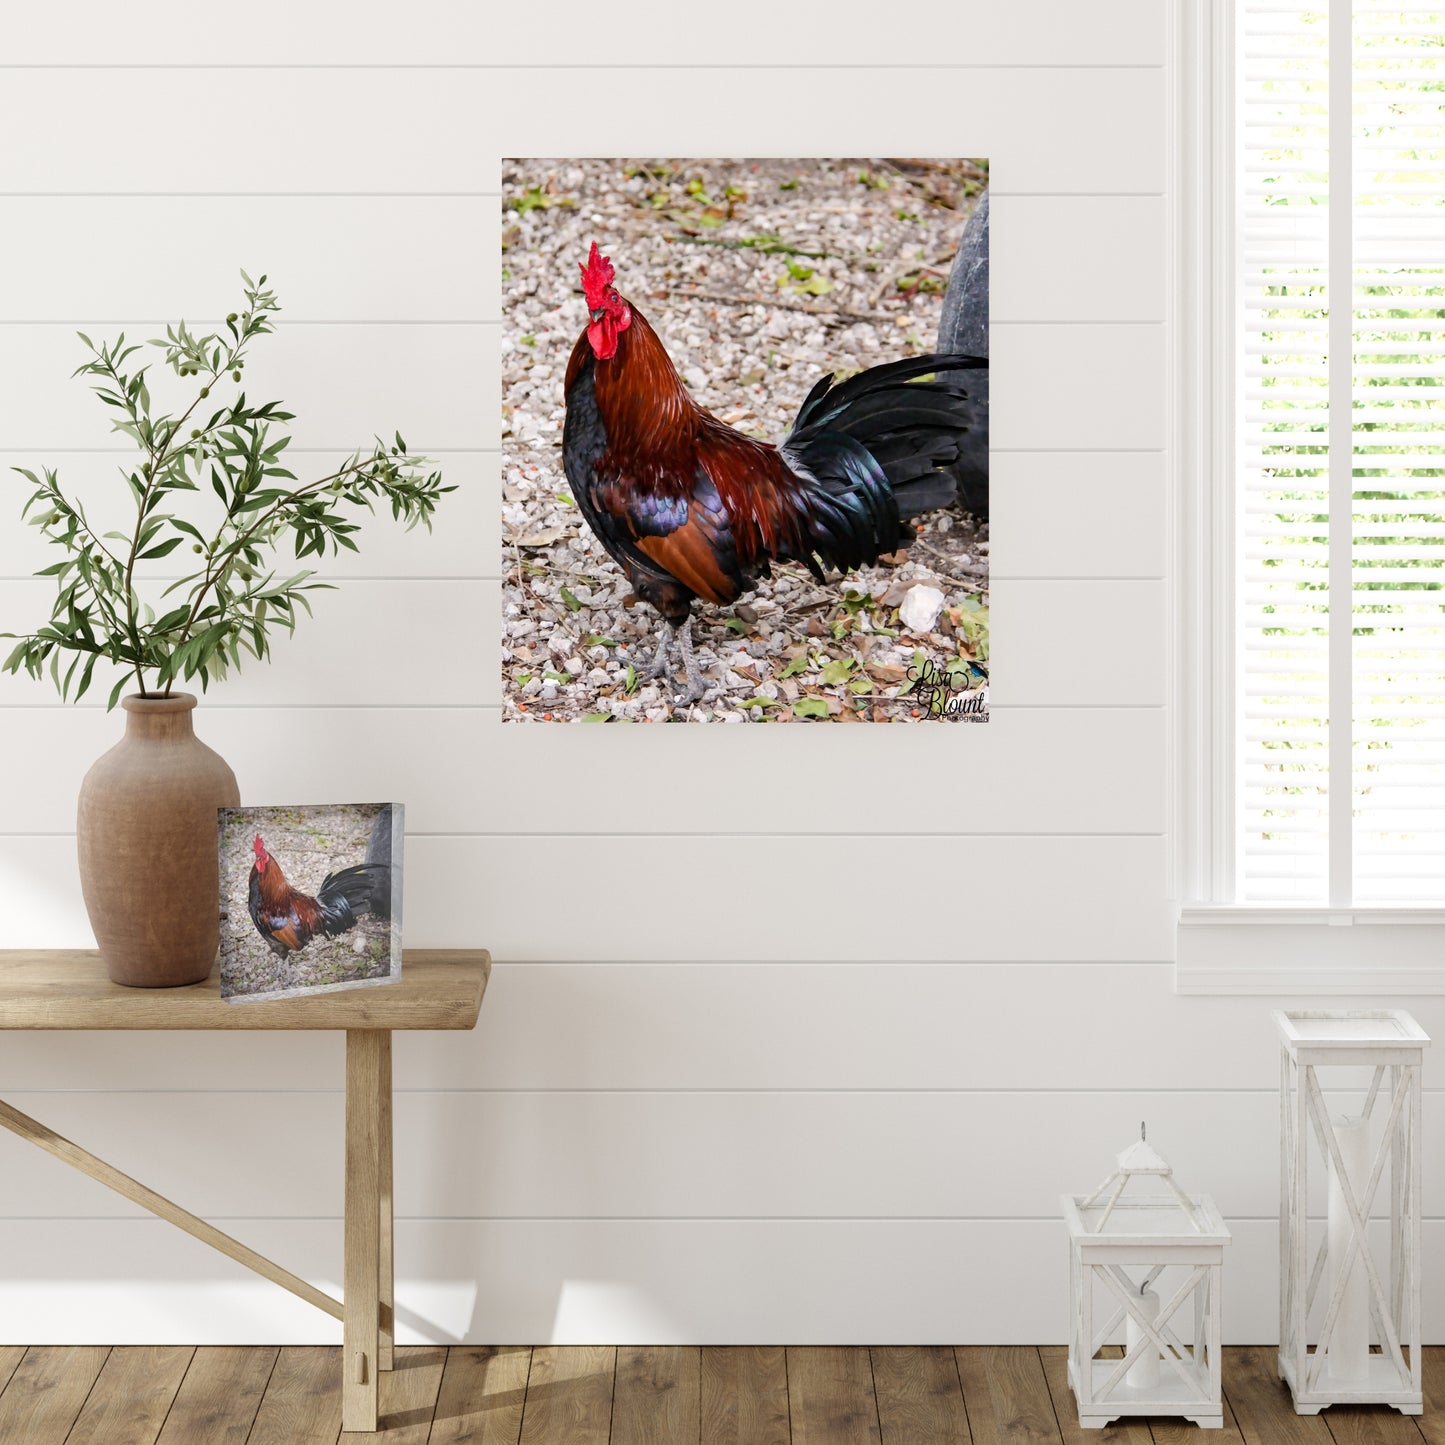 Large picture of banty rooster hanging on wall in farmhouse room with small acrylic block of same rooster on a bench for decor